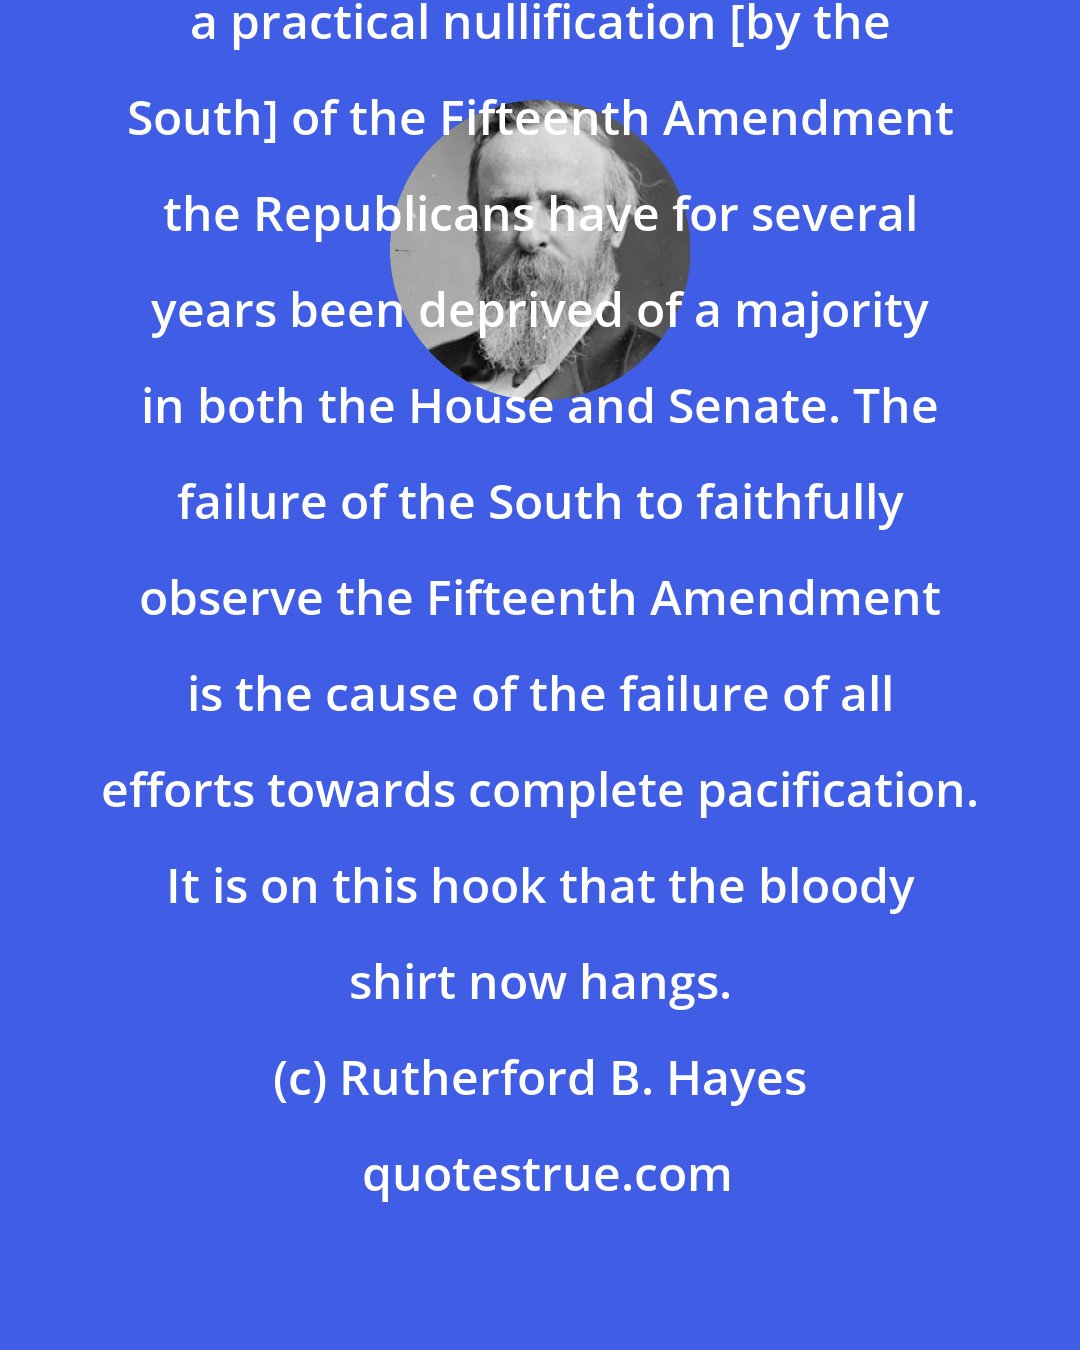 Rutherford B. Hayes: It could be clearly proved that by a practical nullification [by the South] of the Fifteenth Amendment the Republicans have for several years been deprived of a majority in both the House and Senate. The failure of the South to faithfully observe the Fifteenth Amendment is the cause of the failure of all efforts towards complete pacification. It is on this hook that the bloody shirt now hangs.